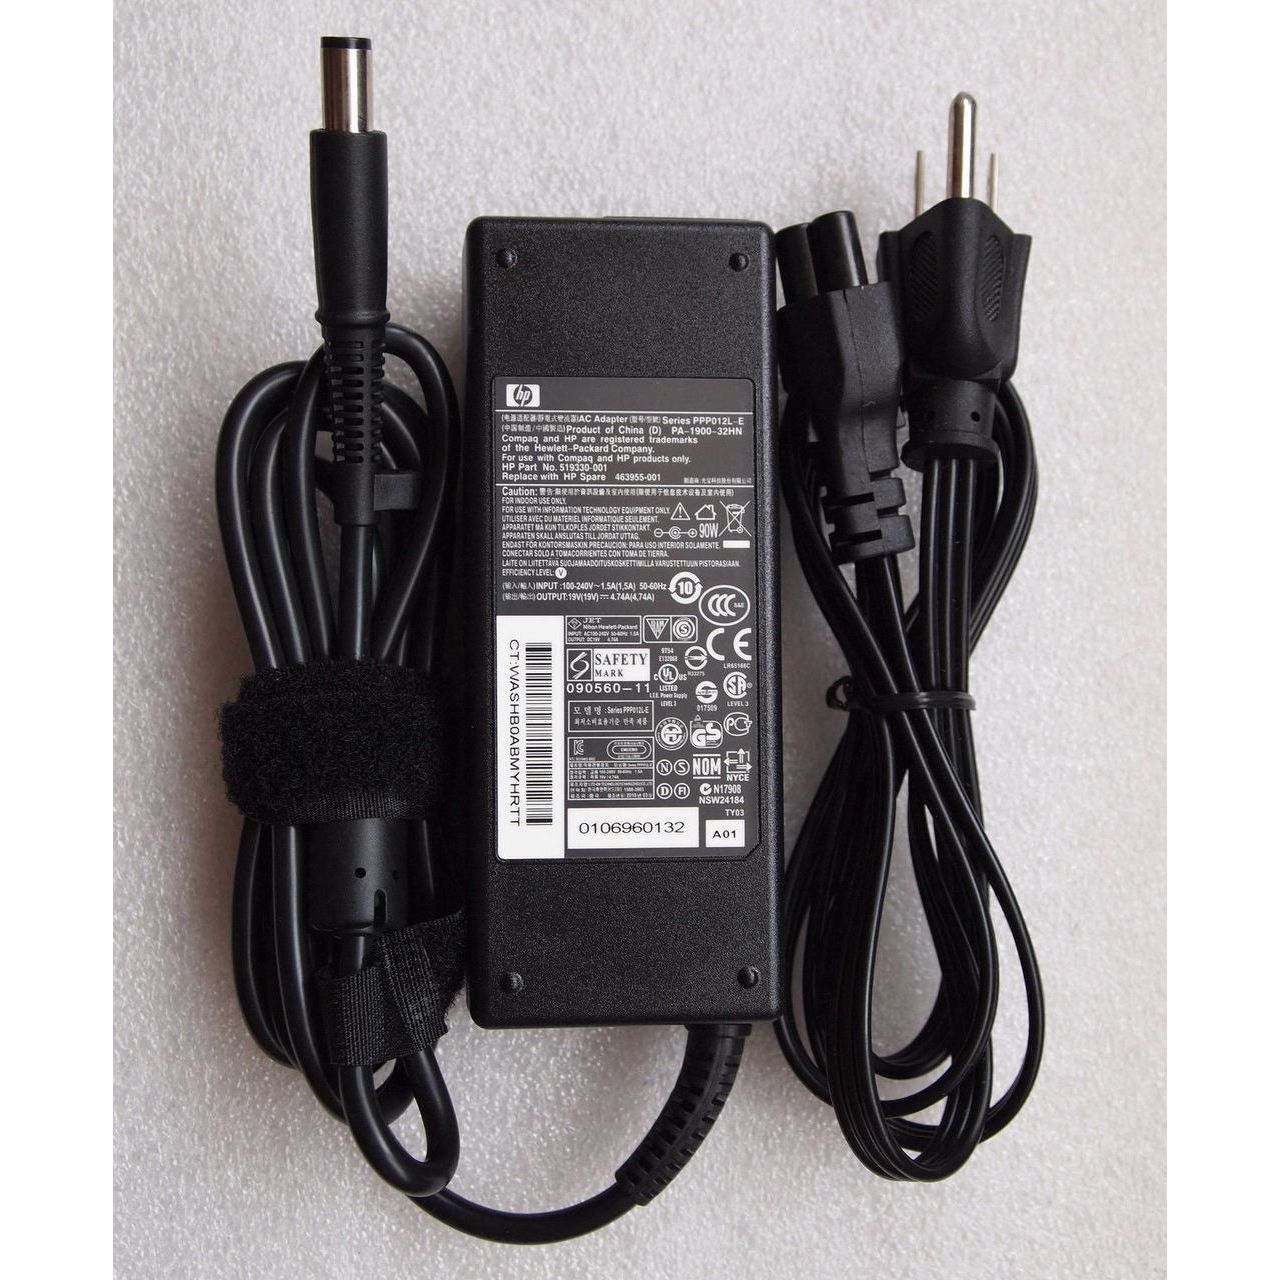 New Genuine HP Elitebook 8640p AC Adapter Charger 613153-001 90W